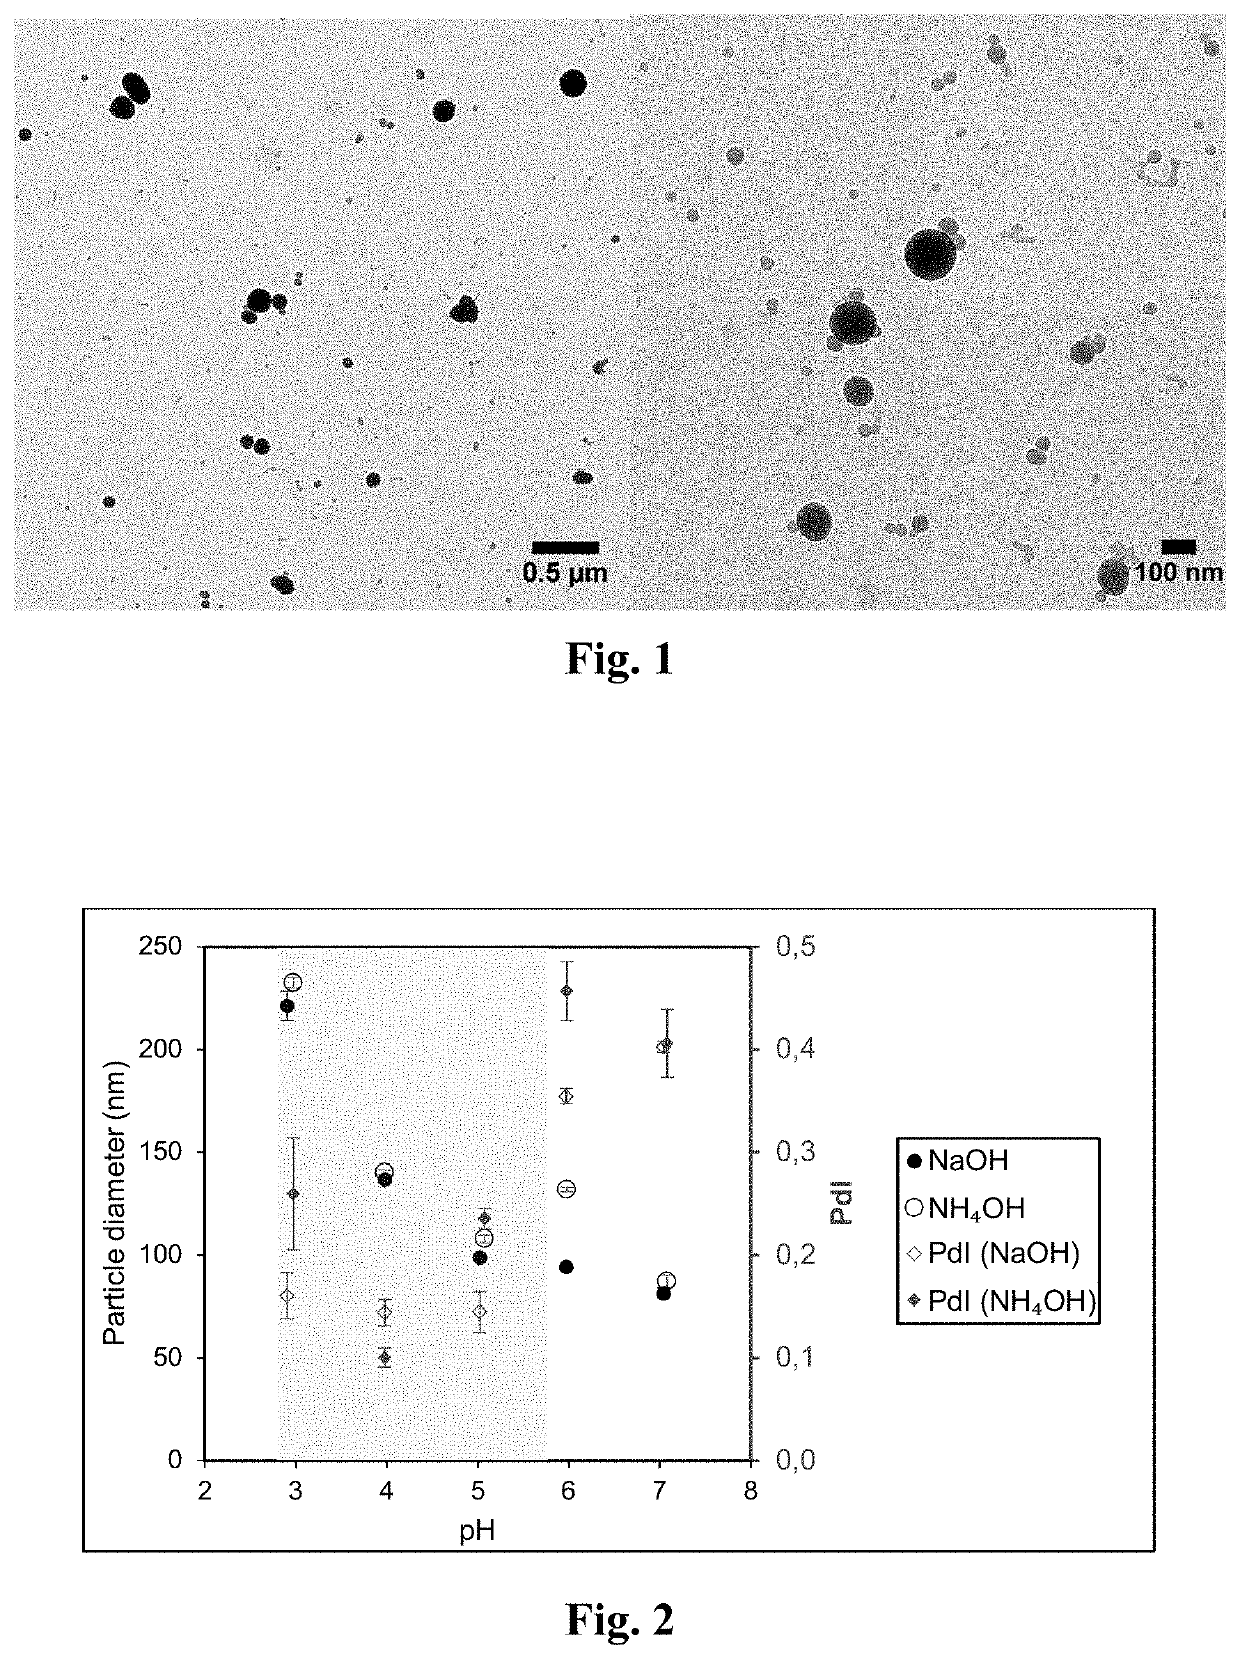 Lignin particle based hydrogel and the method for preparation of lignin colloidal particles by solvent evaporation process